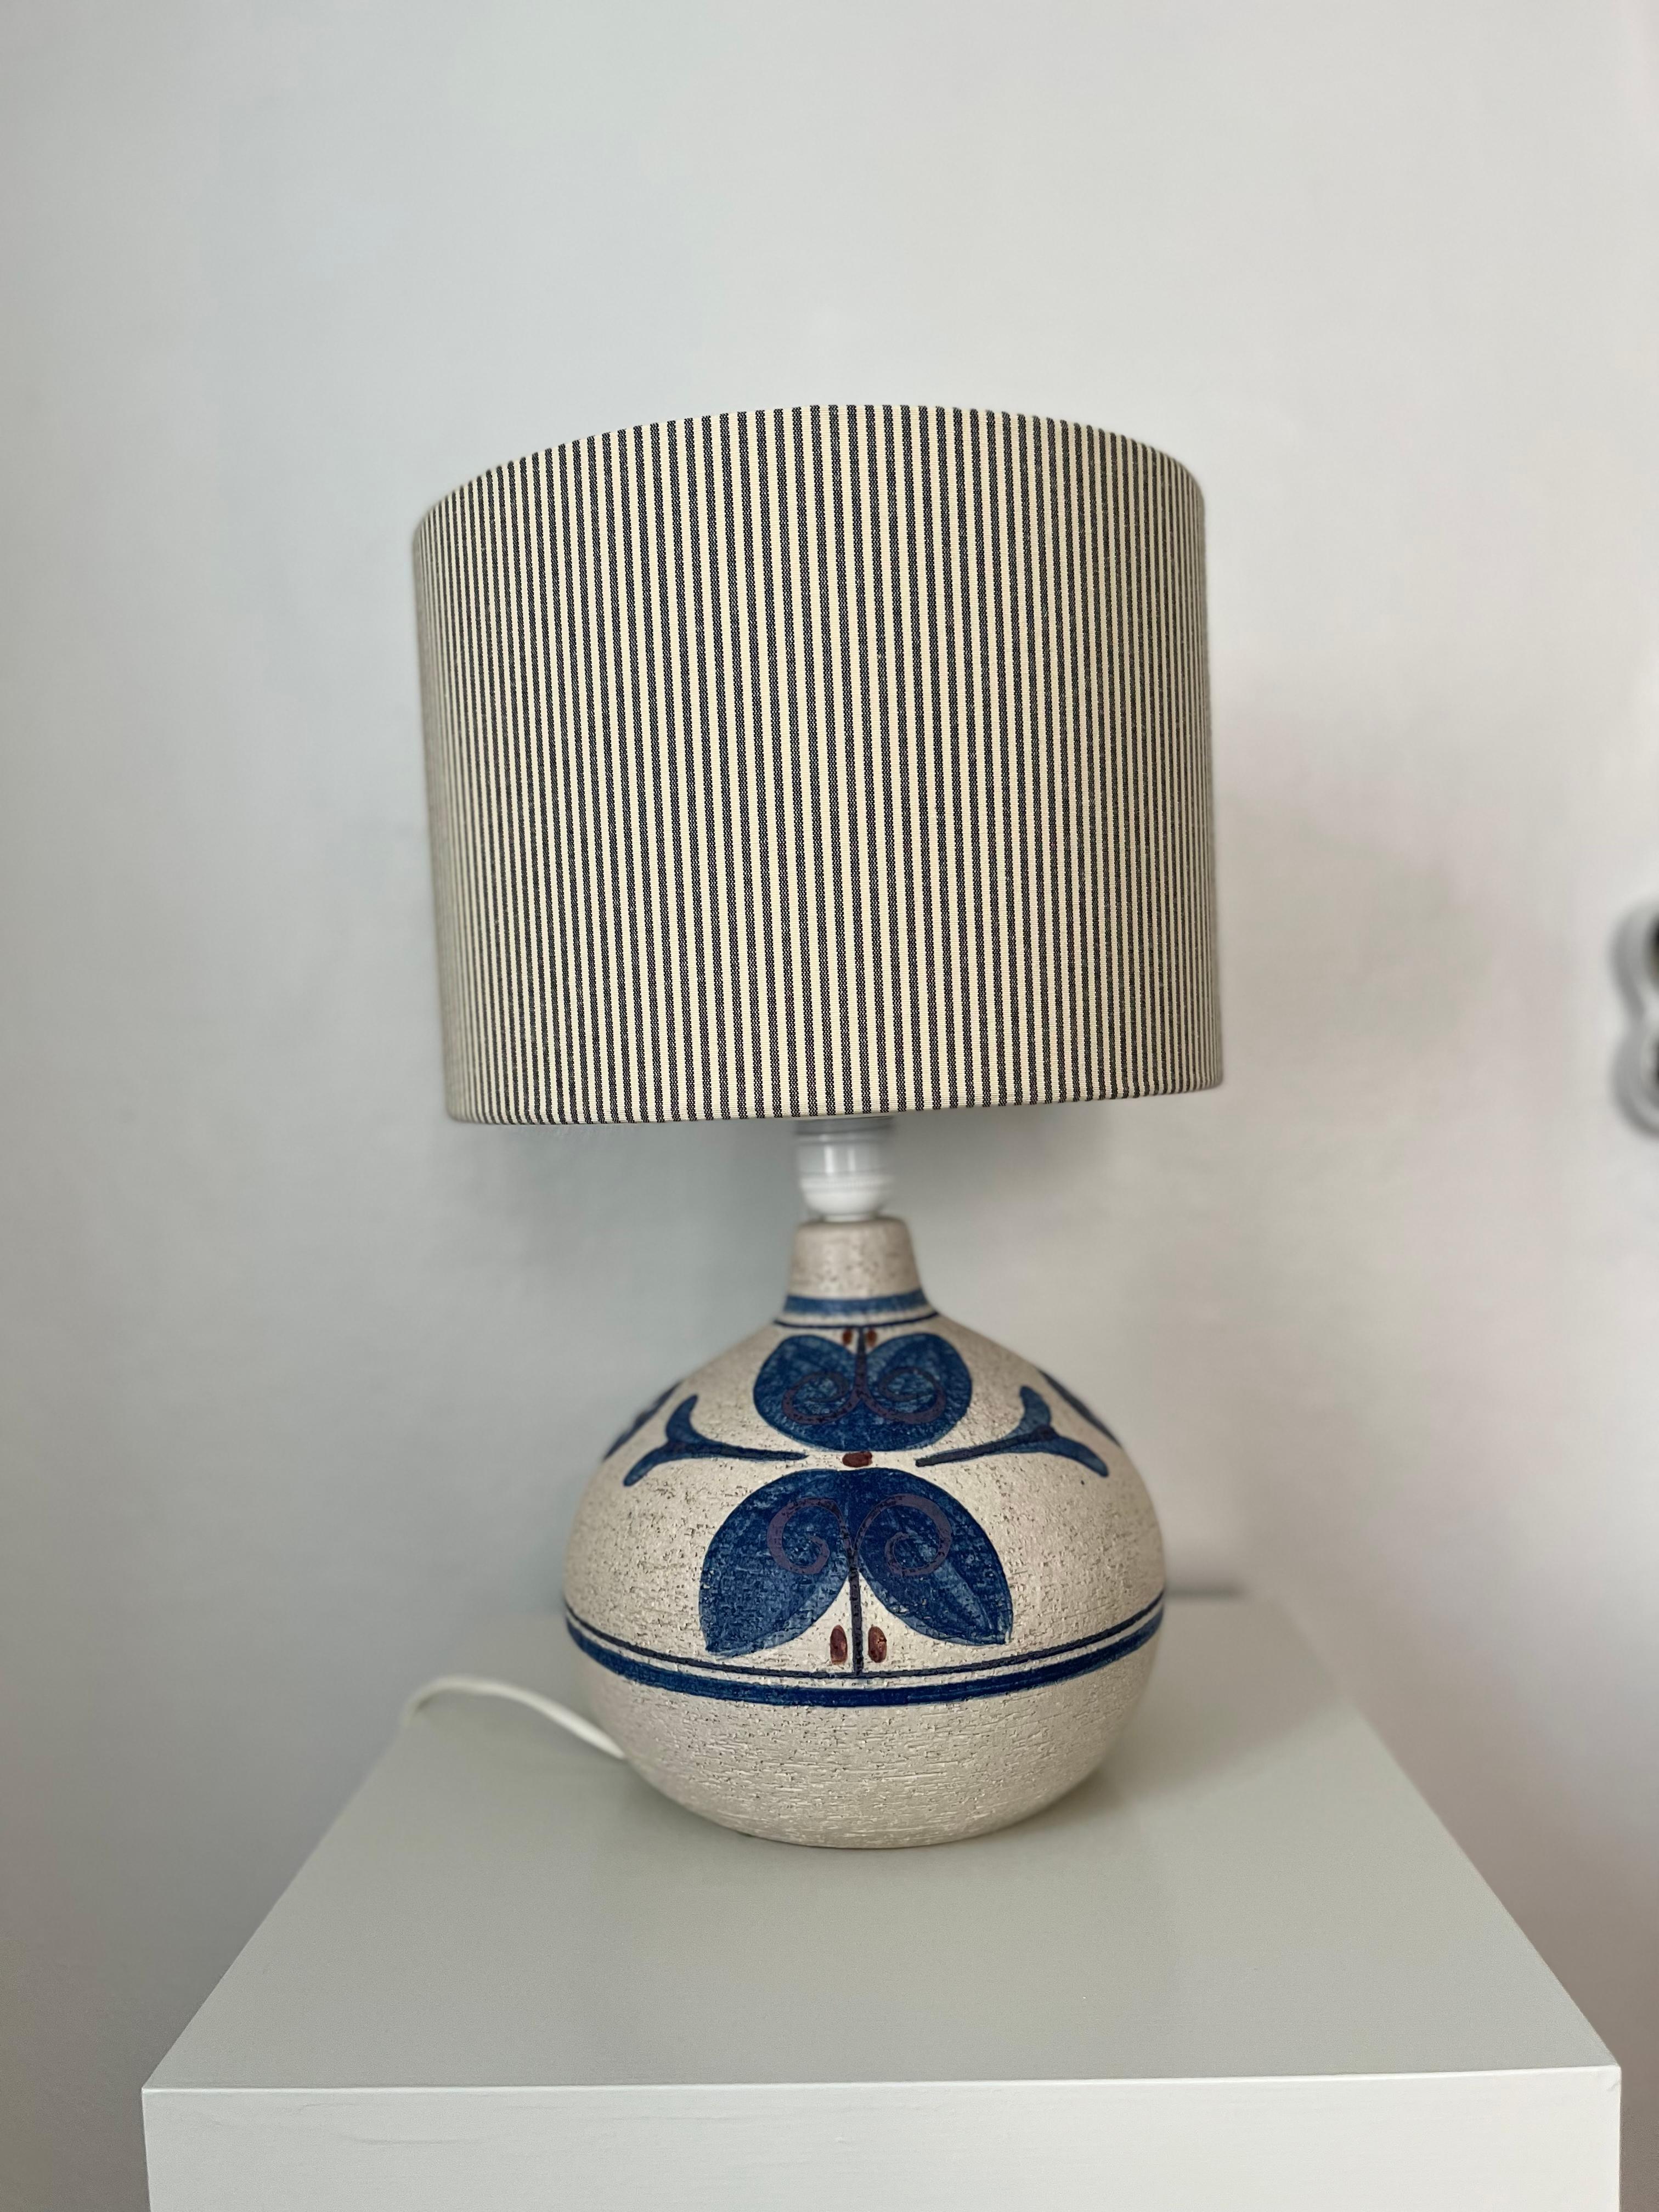 1960s Danish ceramic table lamp by Noomi Backhausen for Søholm

This matte ceramic table lamp was designed by Noomi Backhausen for Danish Søholm in the 1960s. Decorated in clear blue and light purple. European wired with sucket for E-27 light bulb